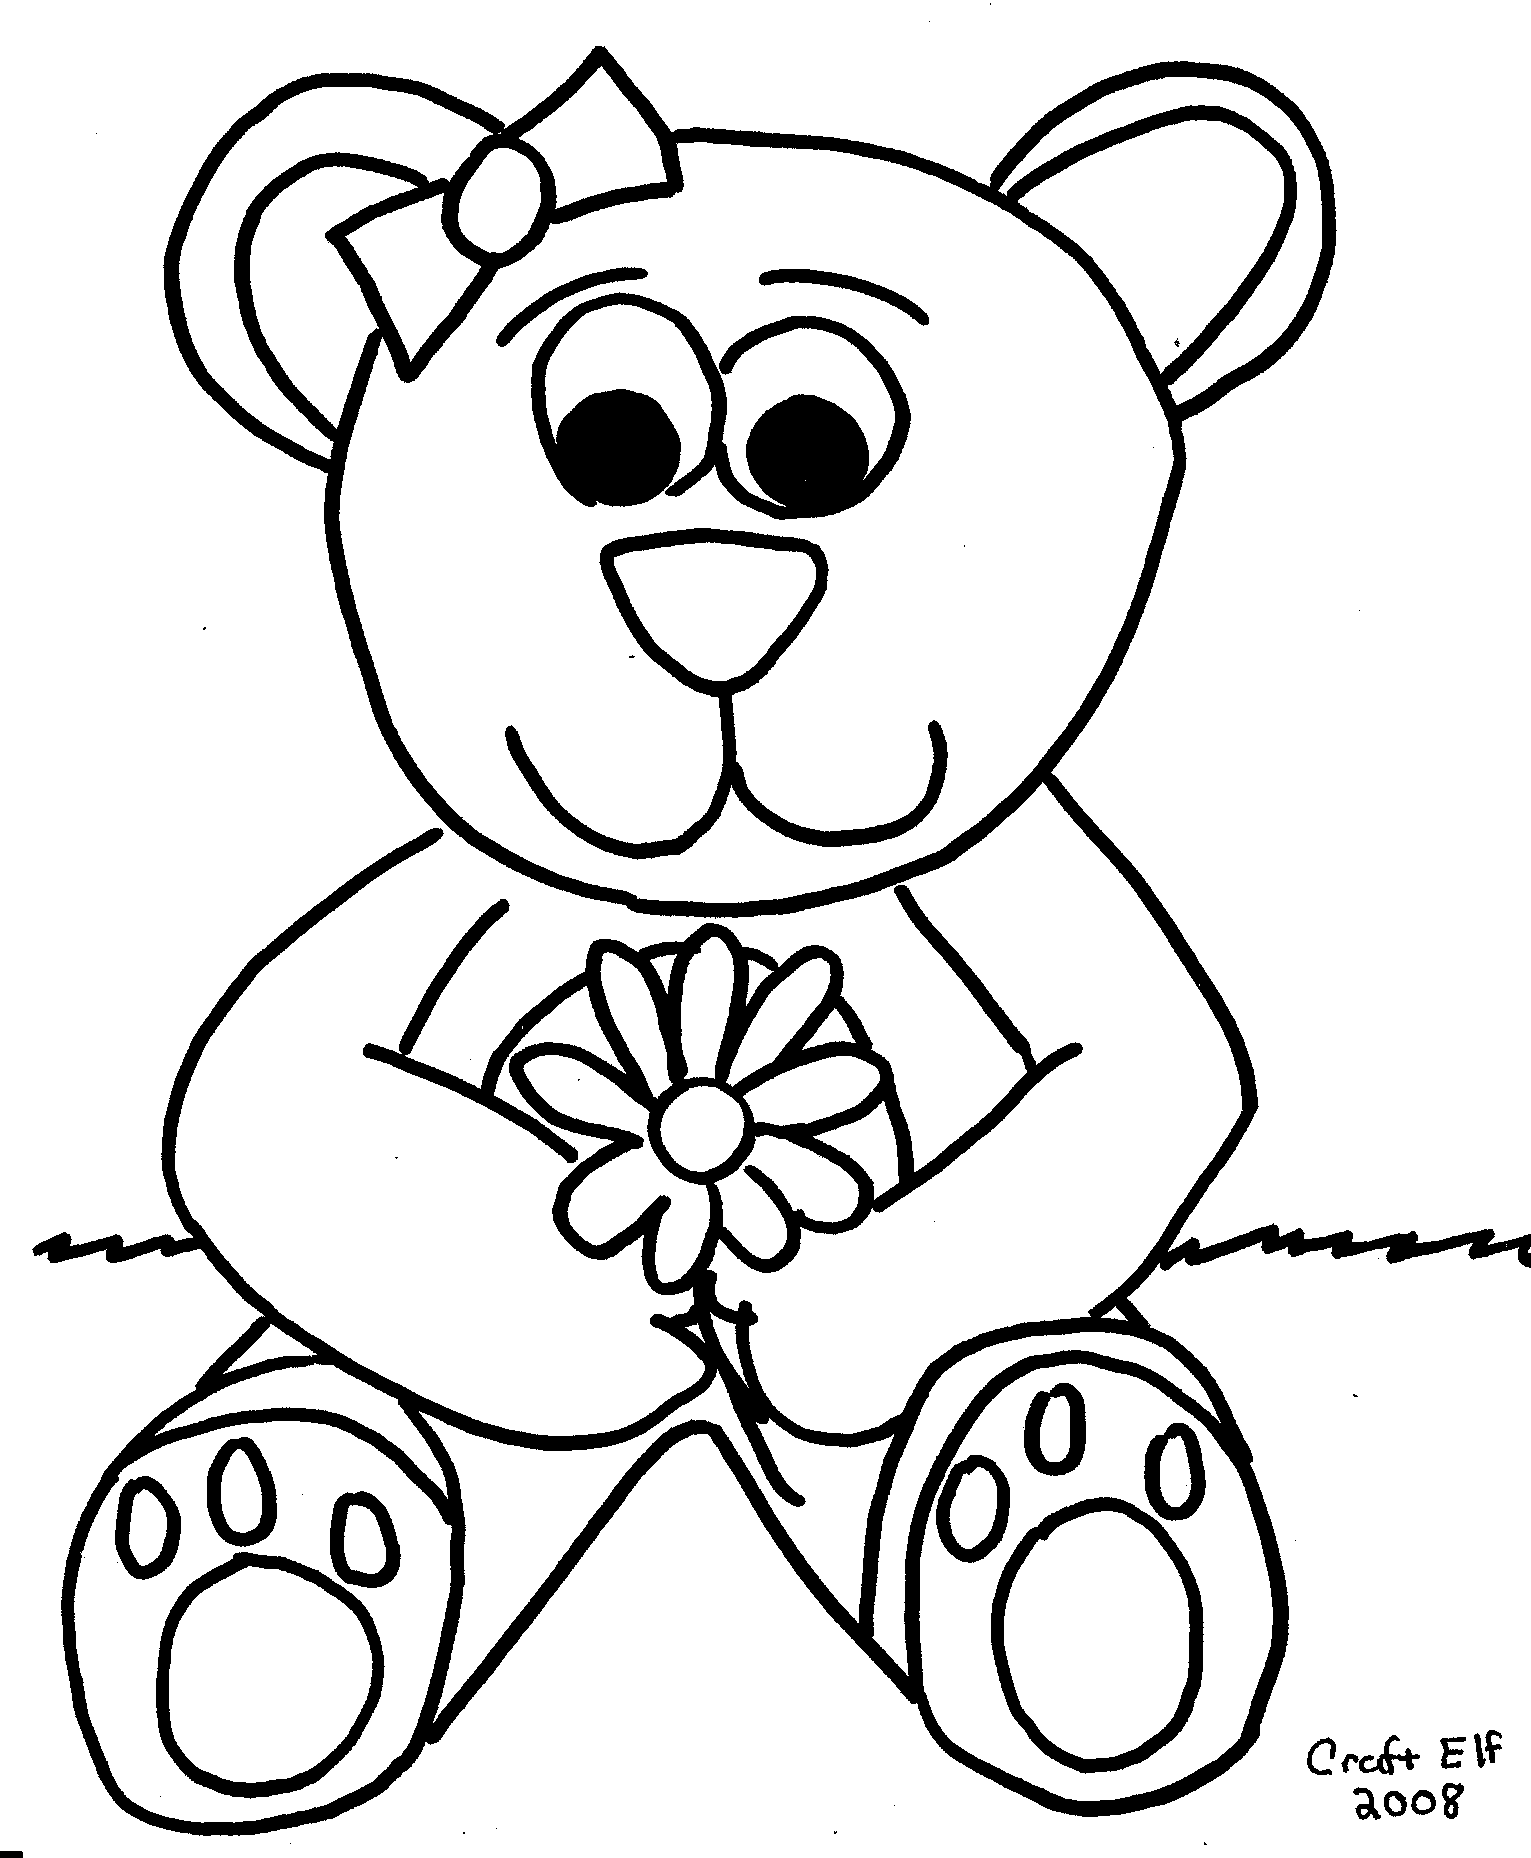 great kids activity with crayons - color a teddy bear